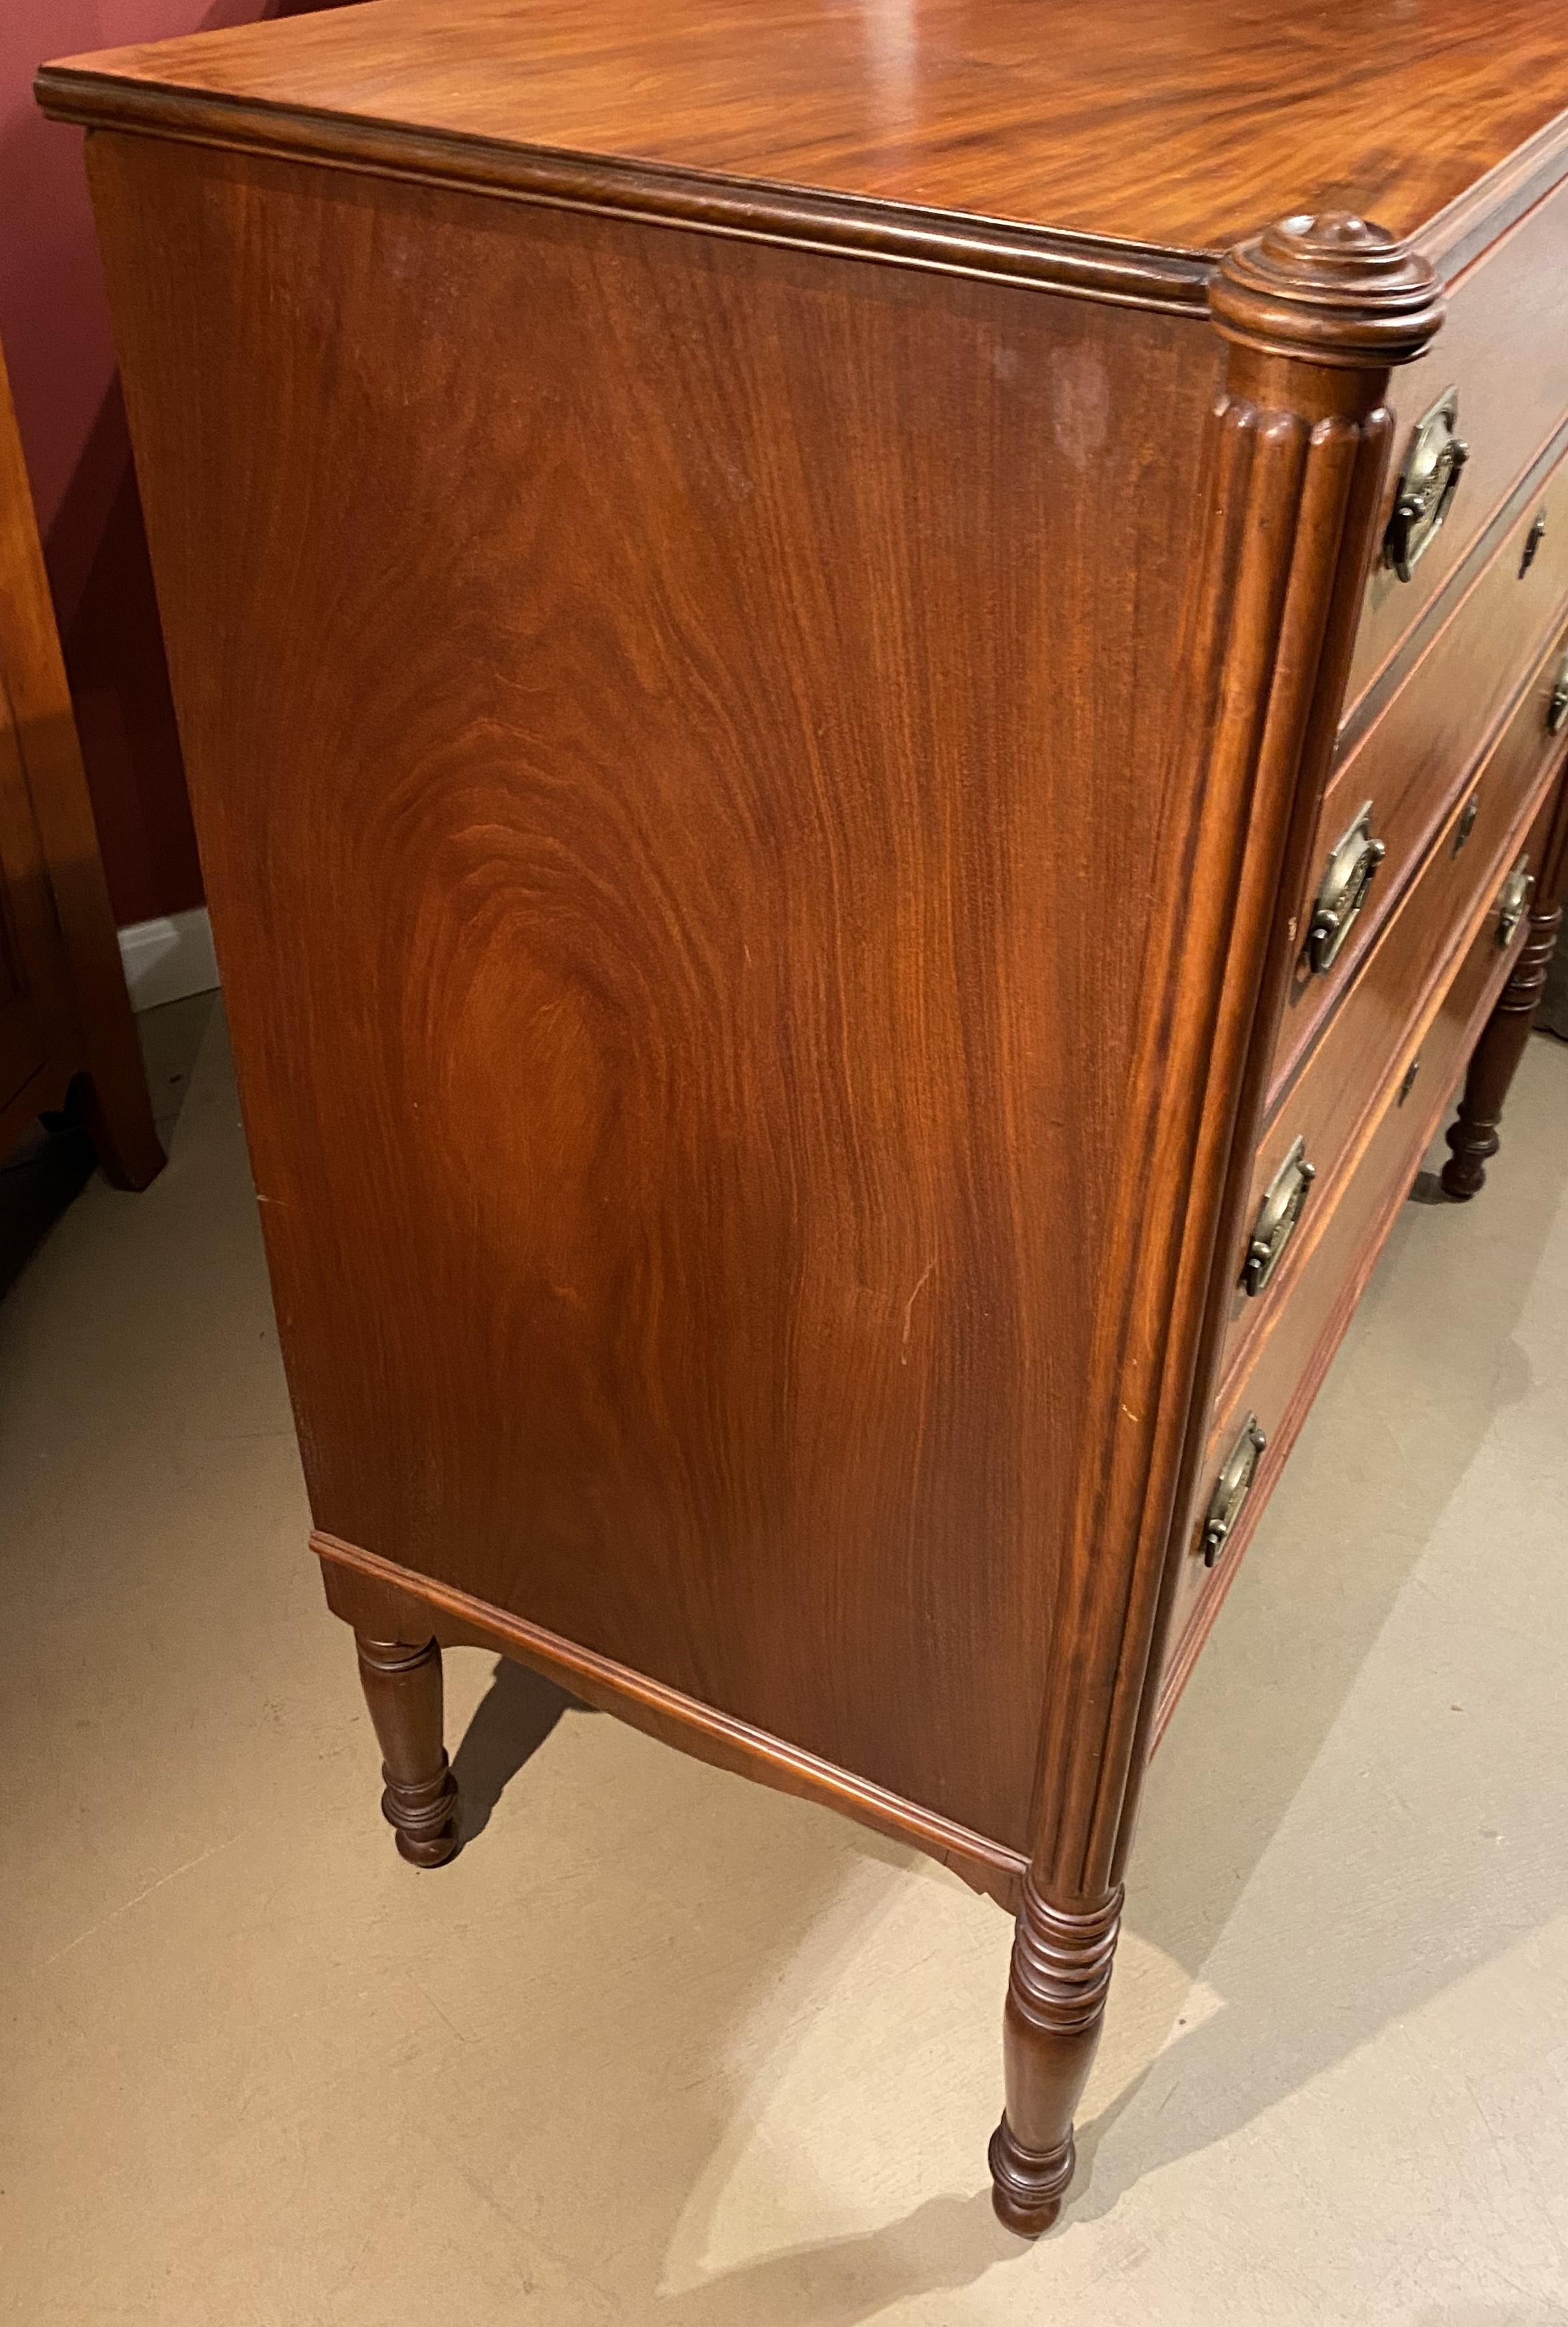 Early 19th Century Sheraton Federal Period Cherry, Mahogany & Tiger Maple Chest of Drawers c.1810 For Sale